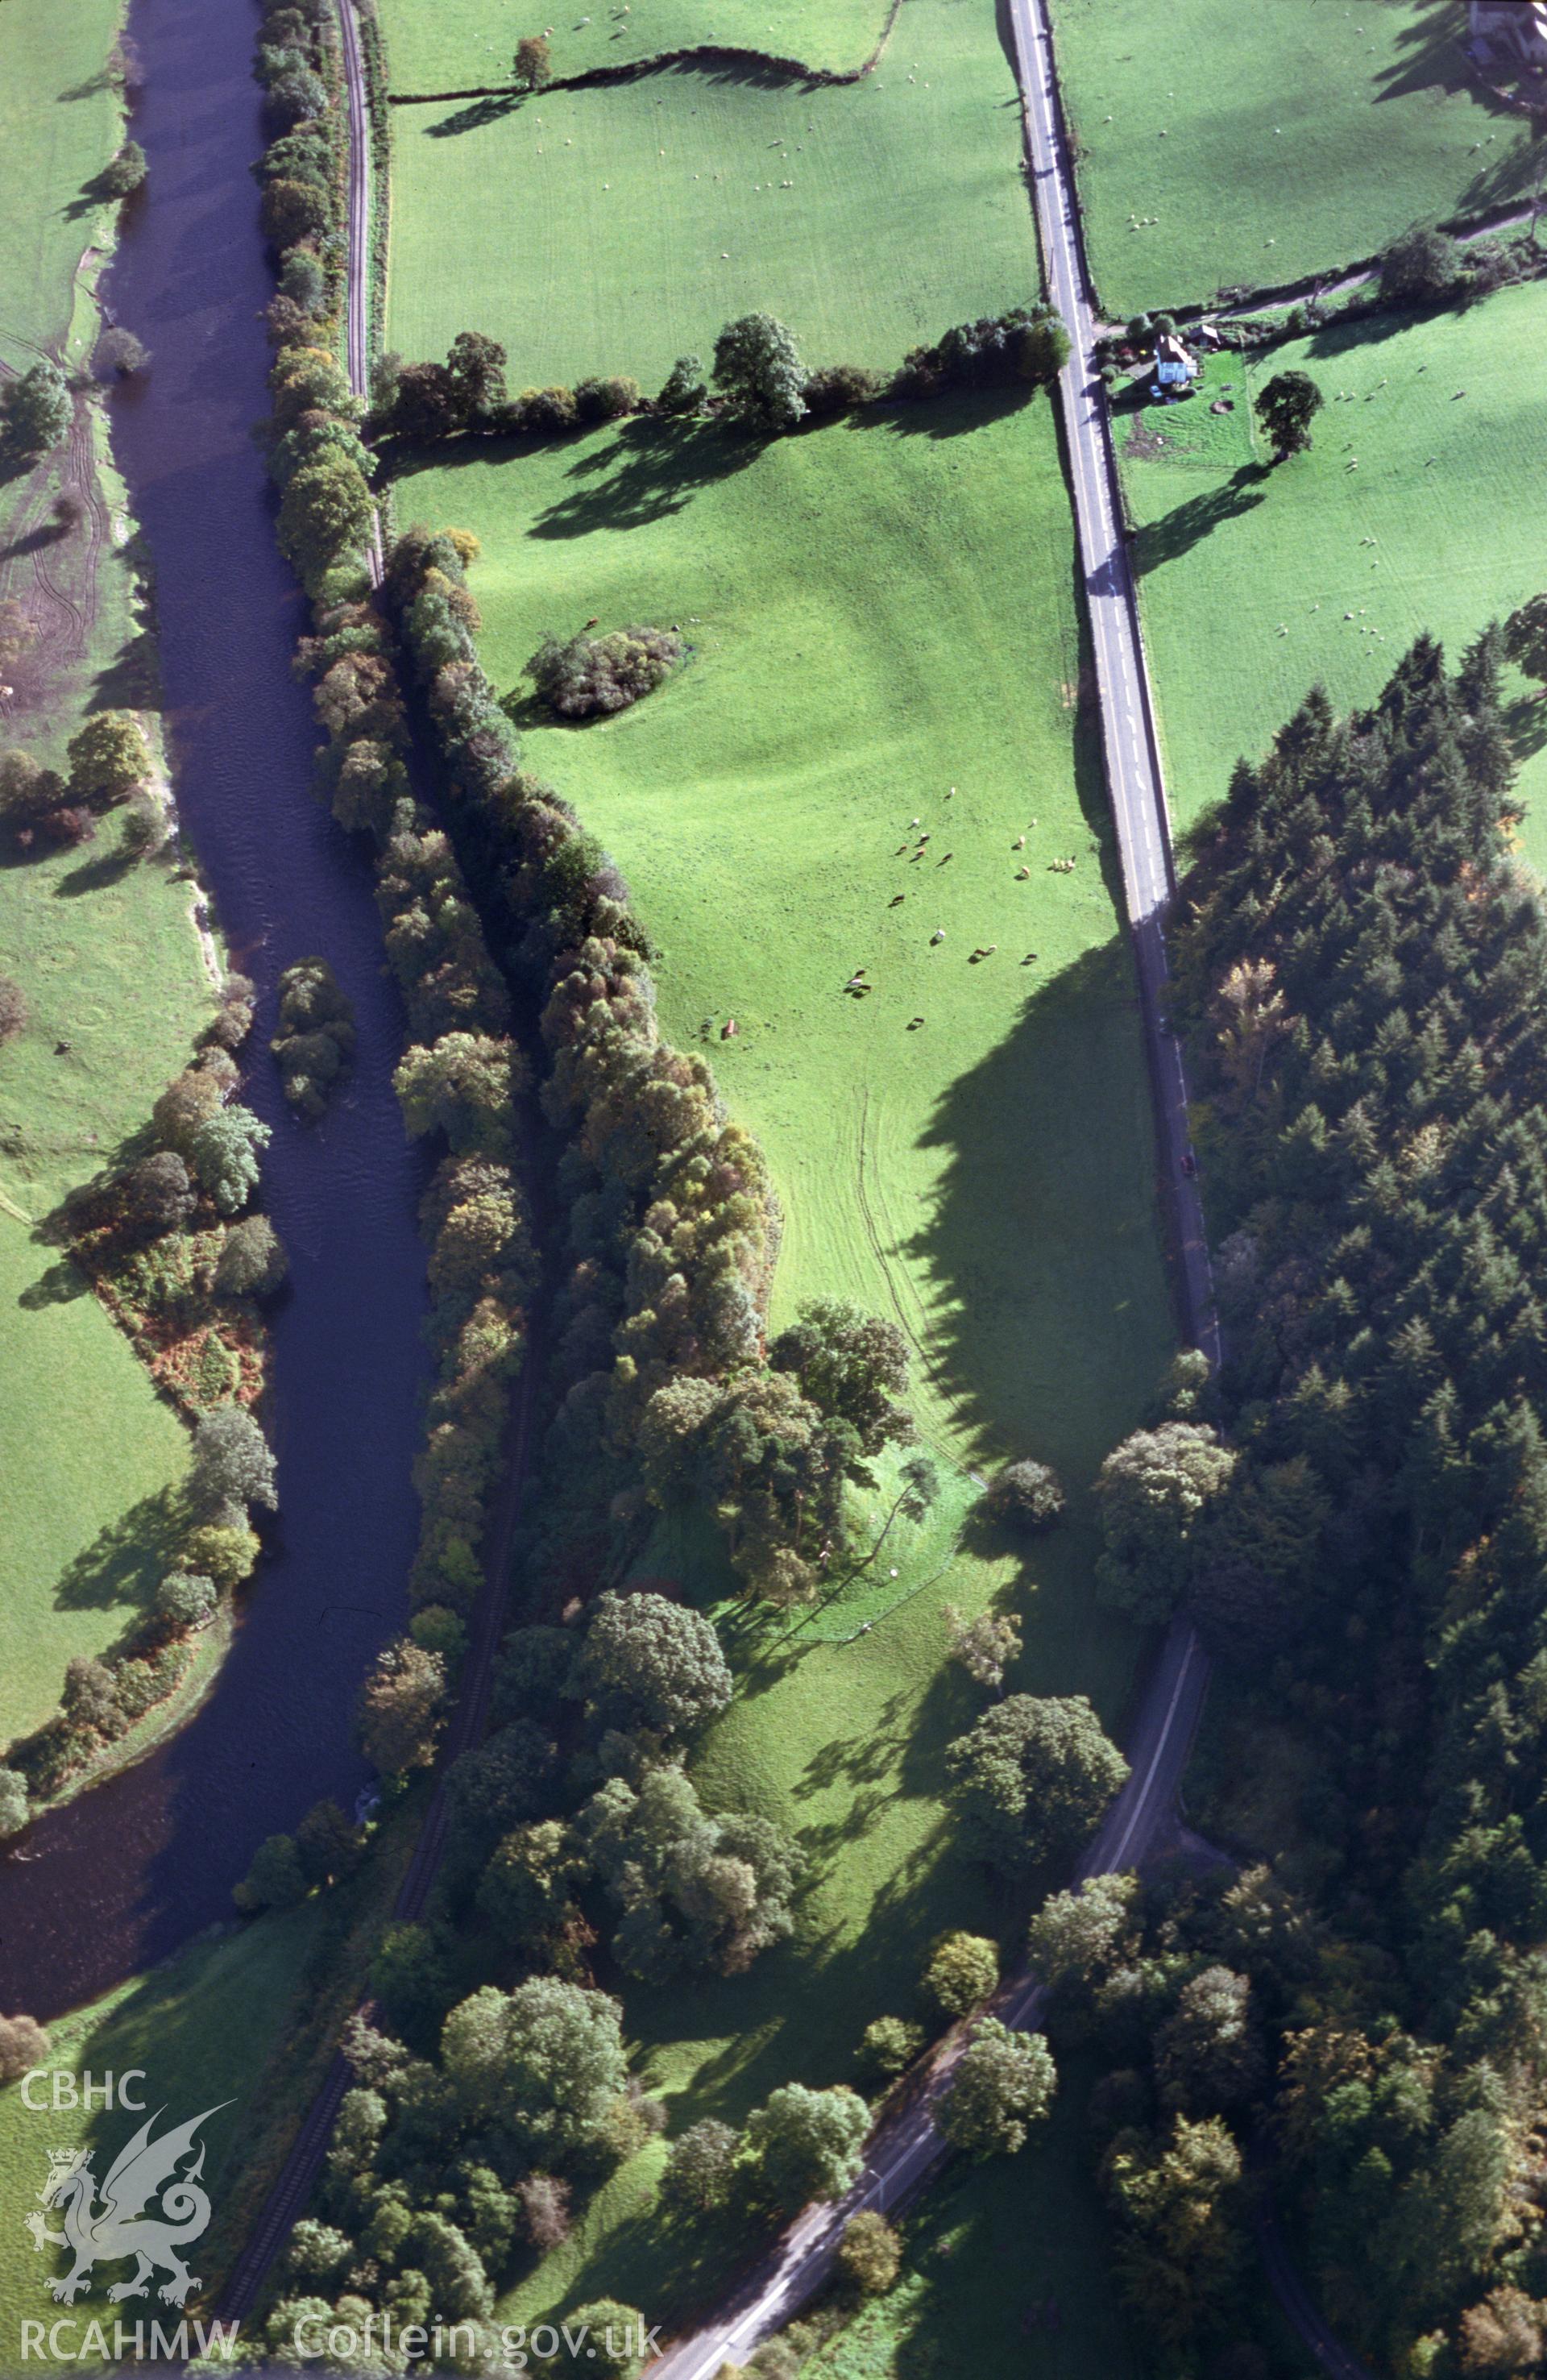 Slide of RCAHMW colour oblique aerial photograph of Owain Glyndwr's Mound, Motte, taken by T.G. Driver, 17/10/2000.